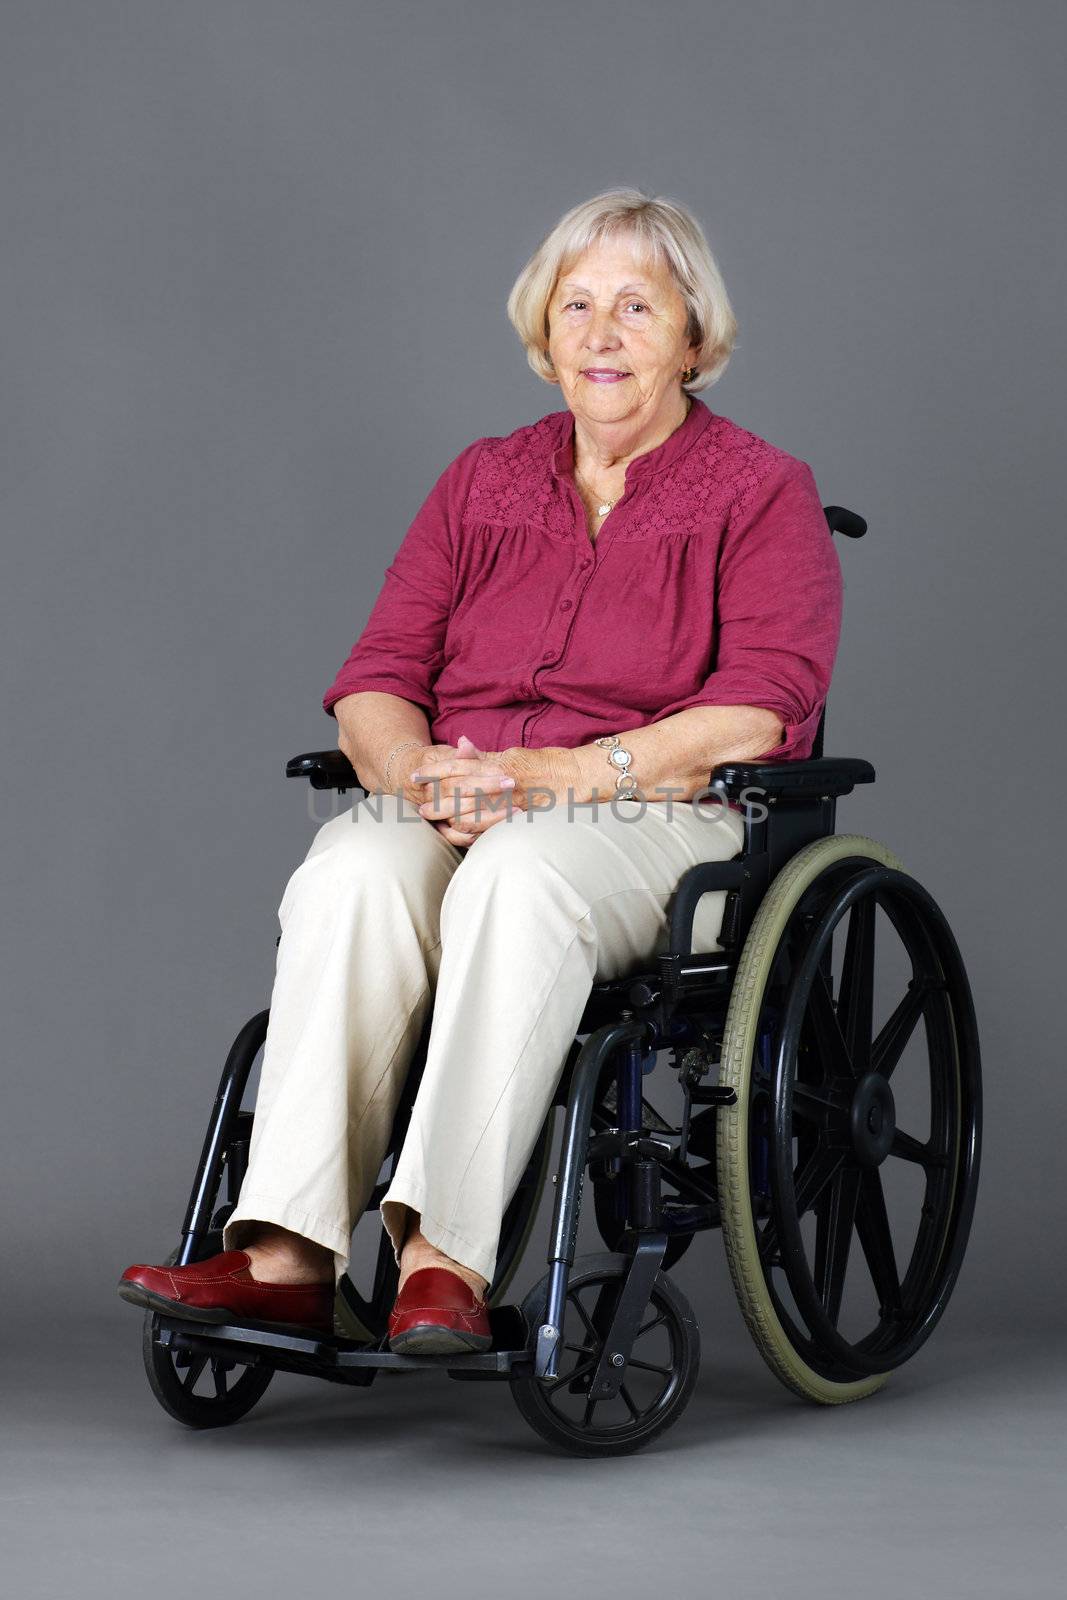 Smiling senior woman seated in a wheelchair, either handicaped or disabled, looking at camera over neutral grey background.